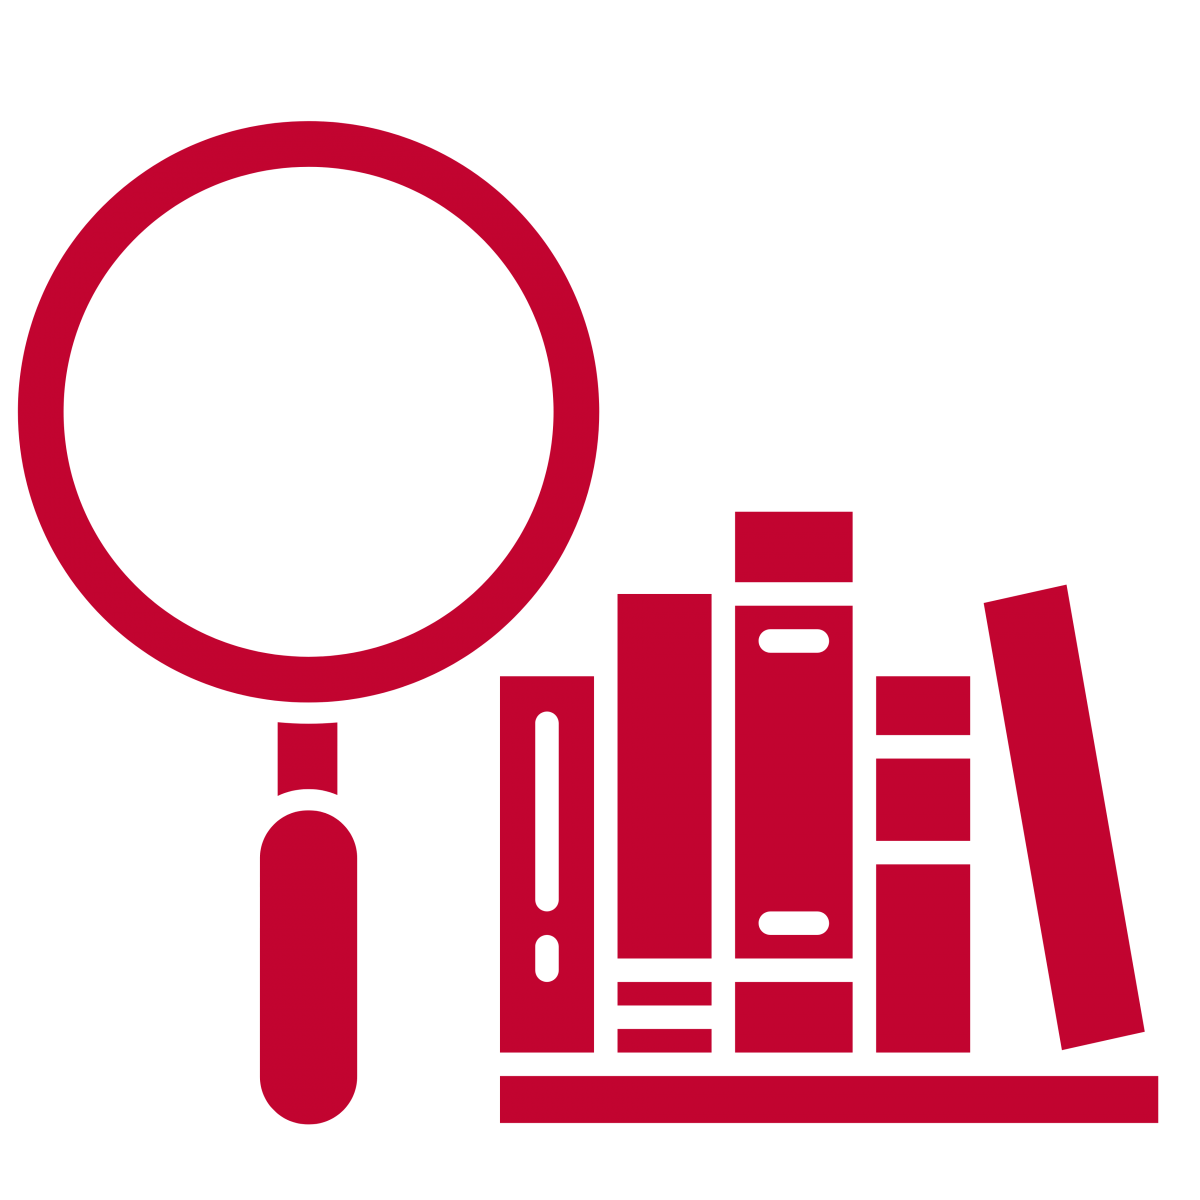 An icon of a red magnifying glass next to a red bookshelf with red books on the shelf.